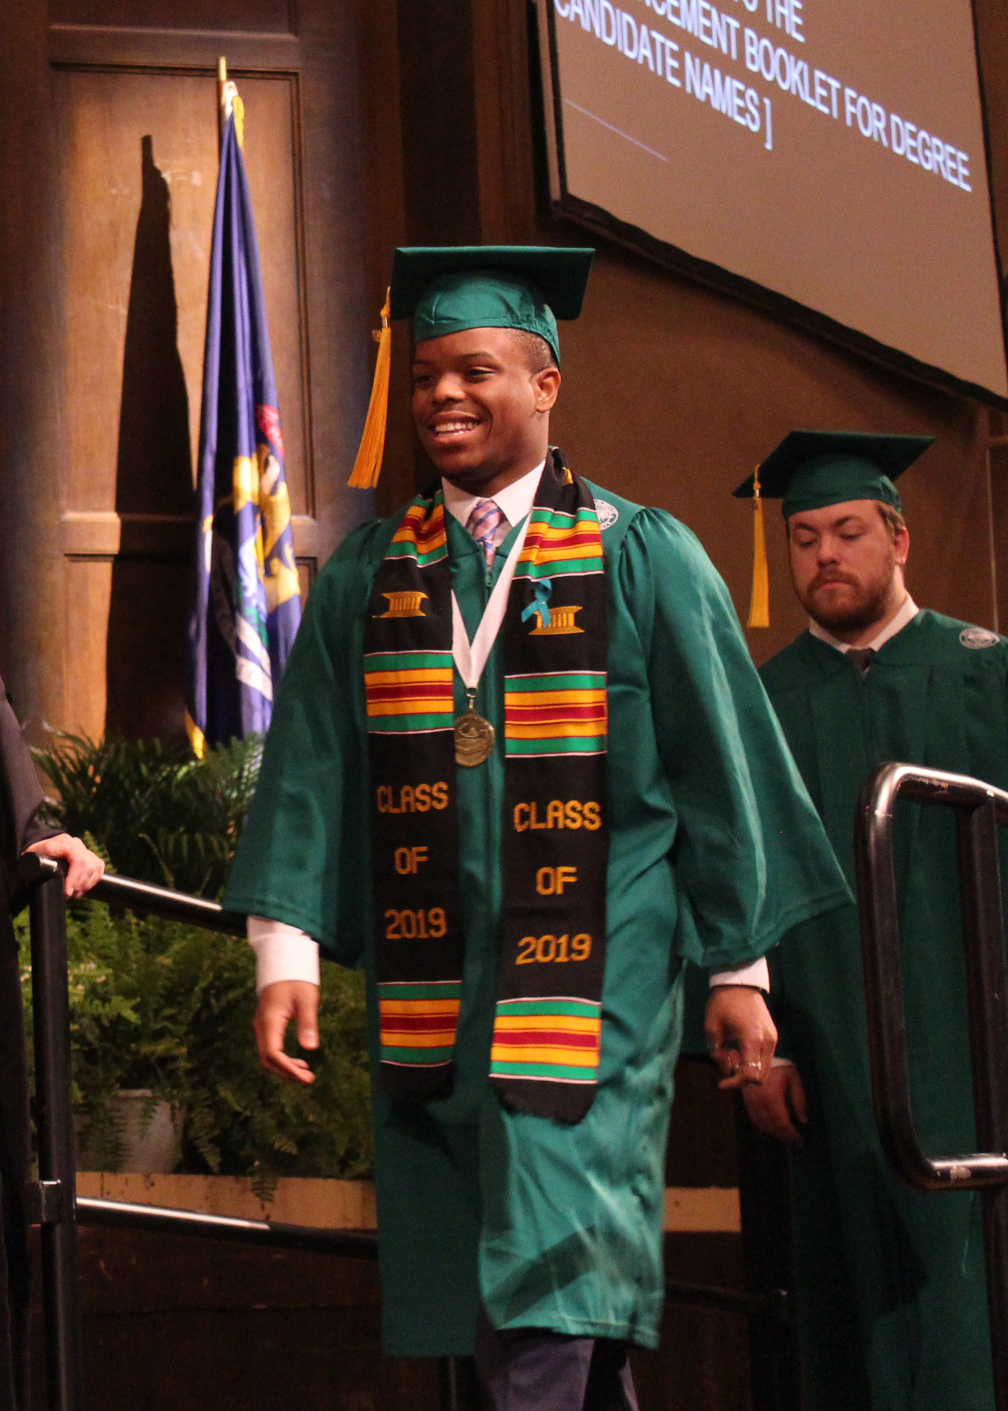 Malcolm Davis at Spring 2019 Commencement, prior to receiving his diploma